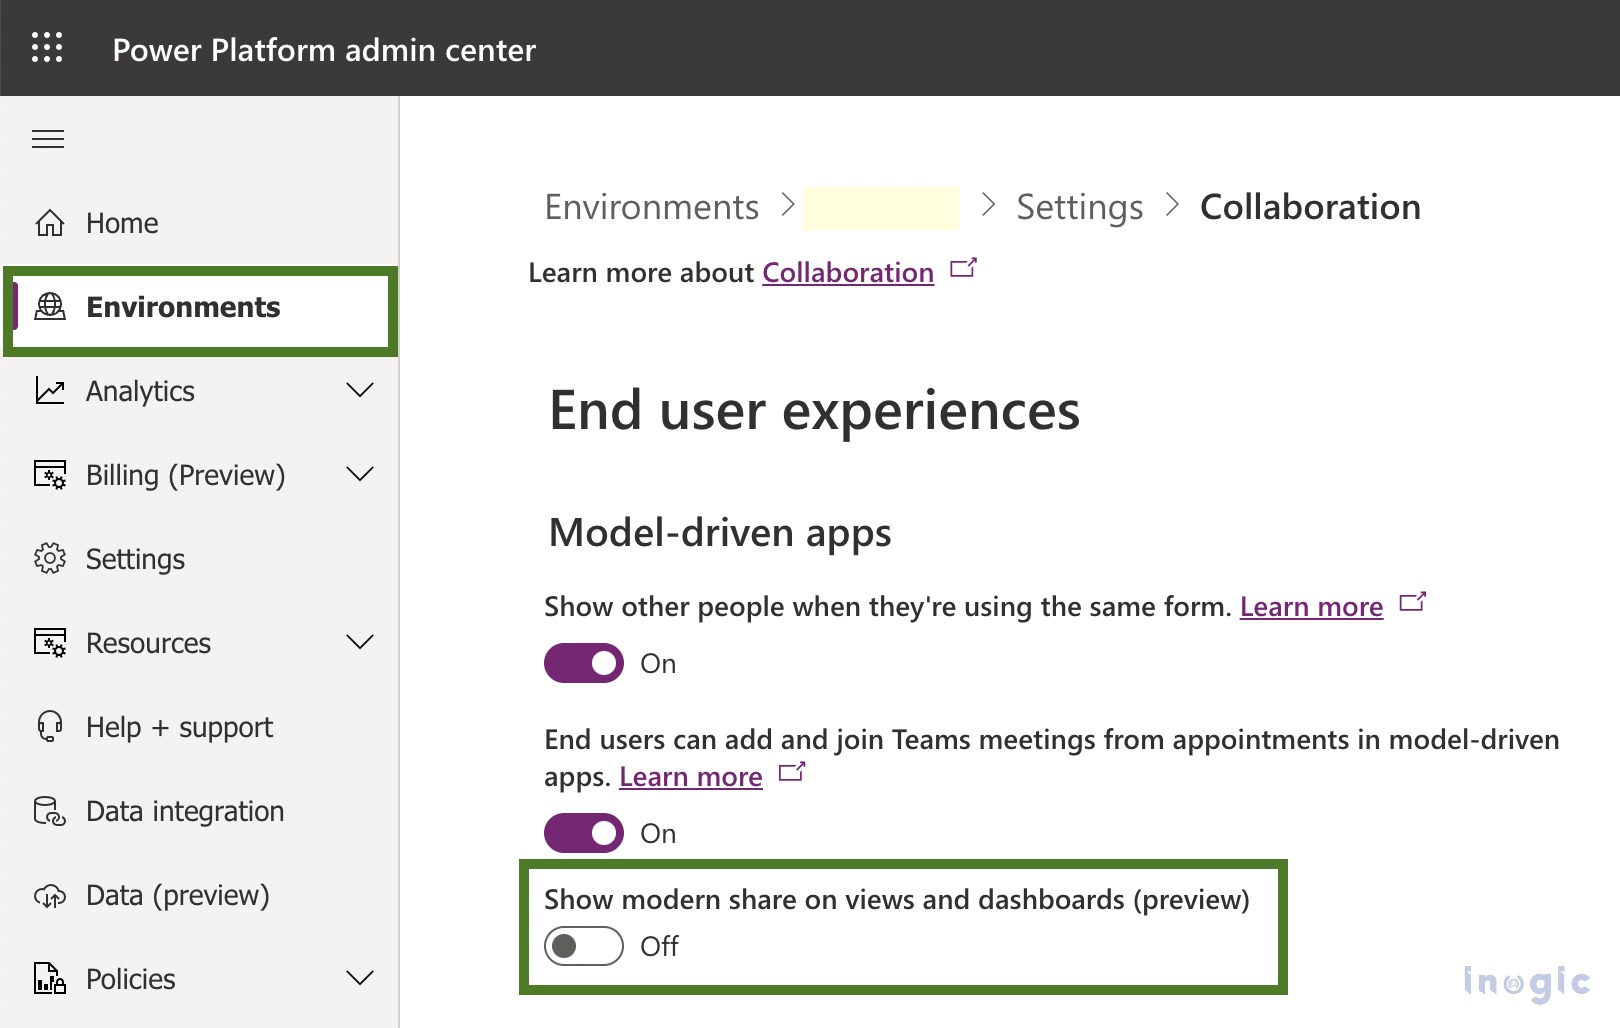 Enabling modern “Share” provision on Dashboards and Views within Dynamics 365